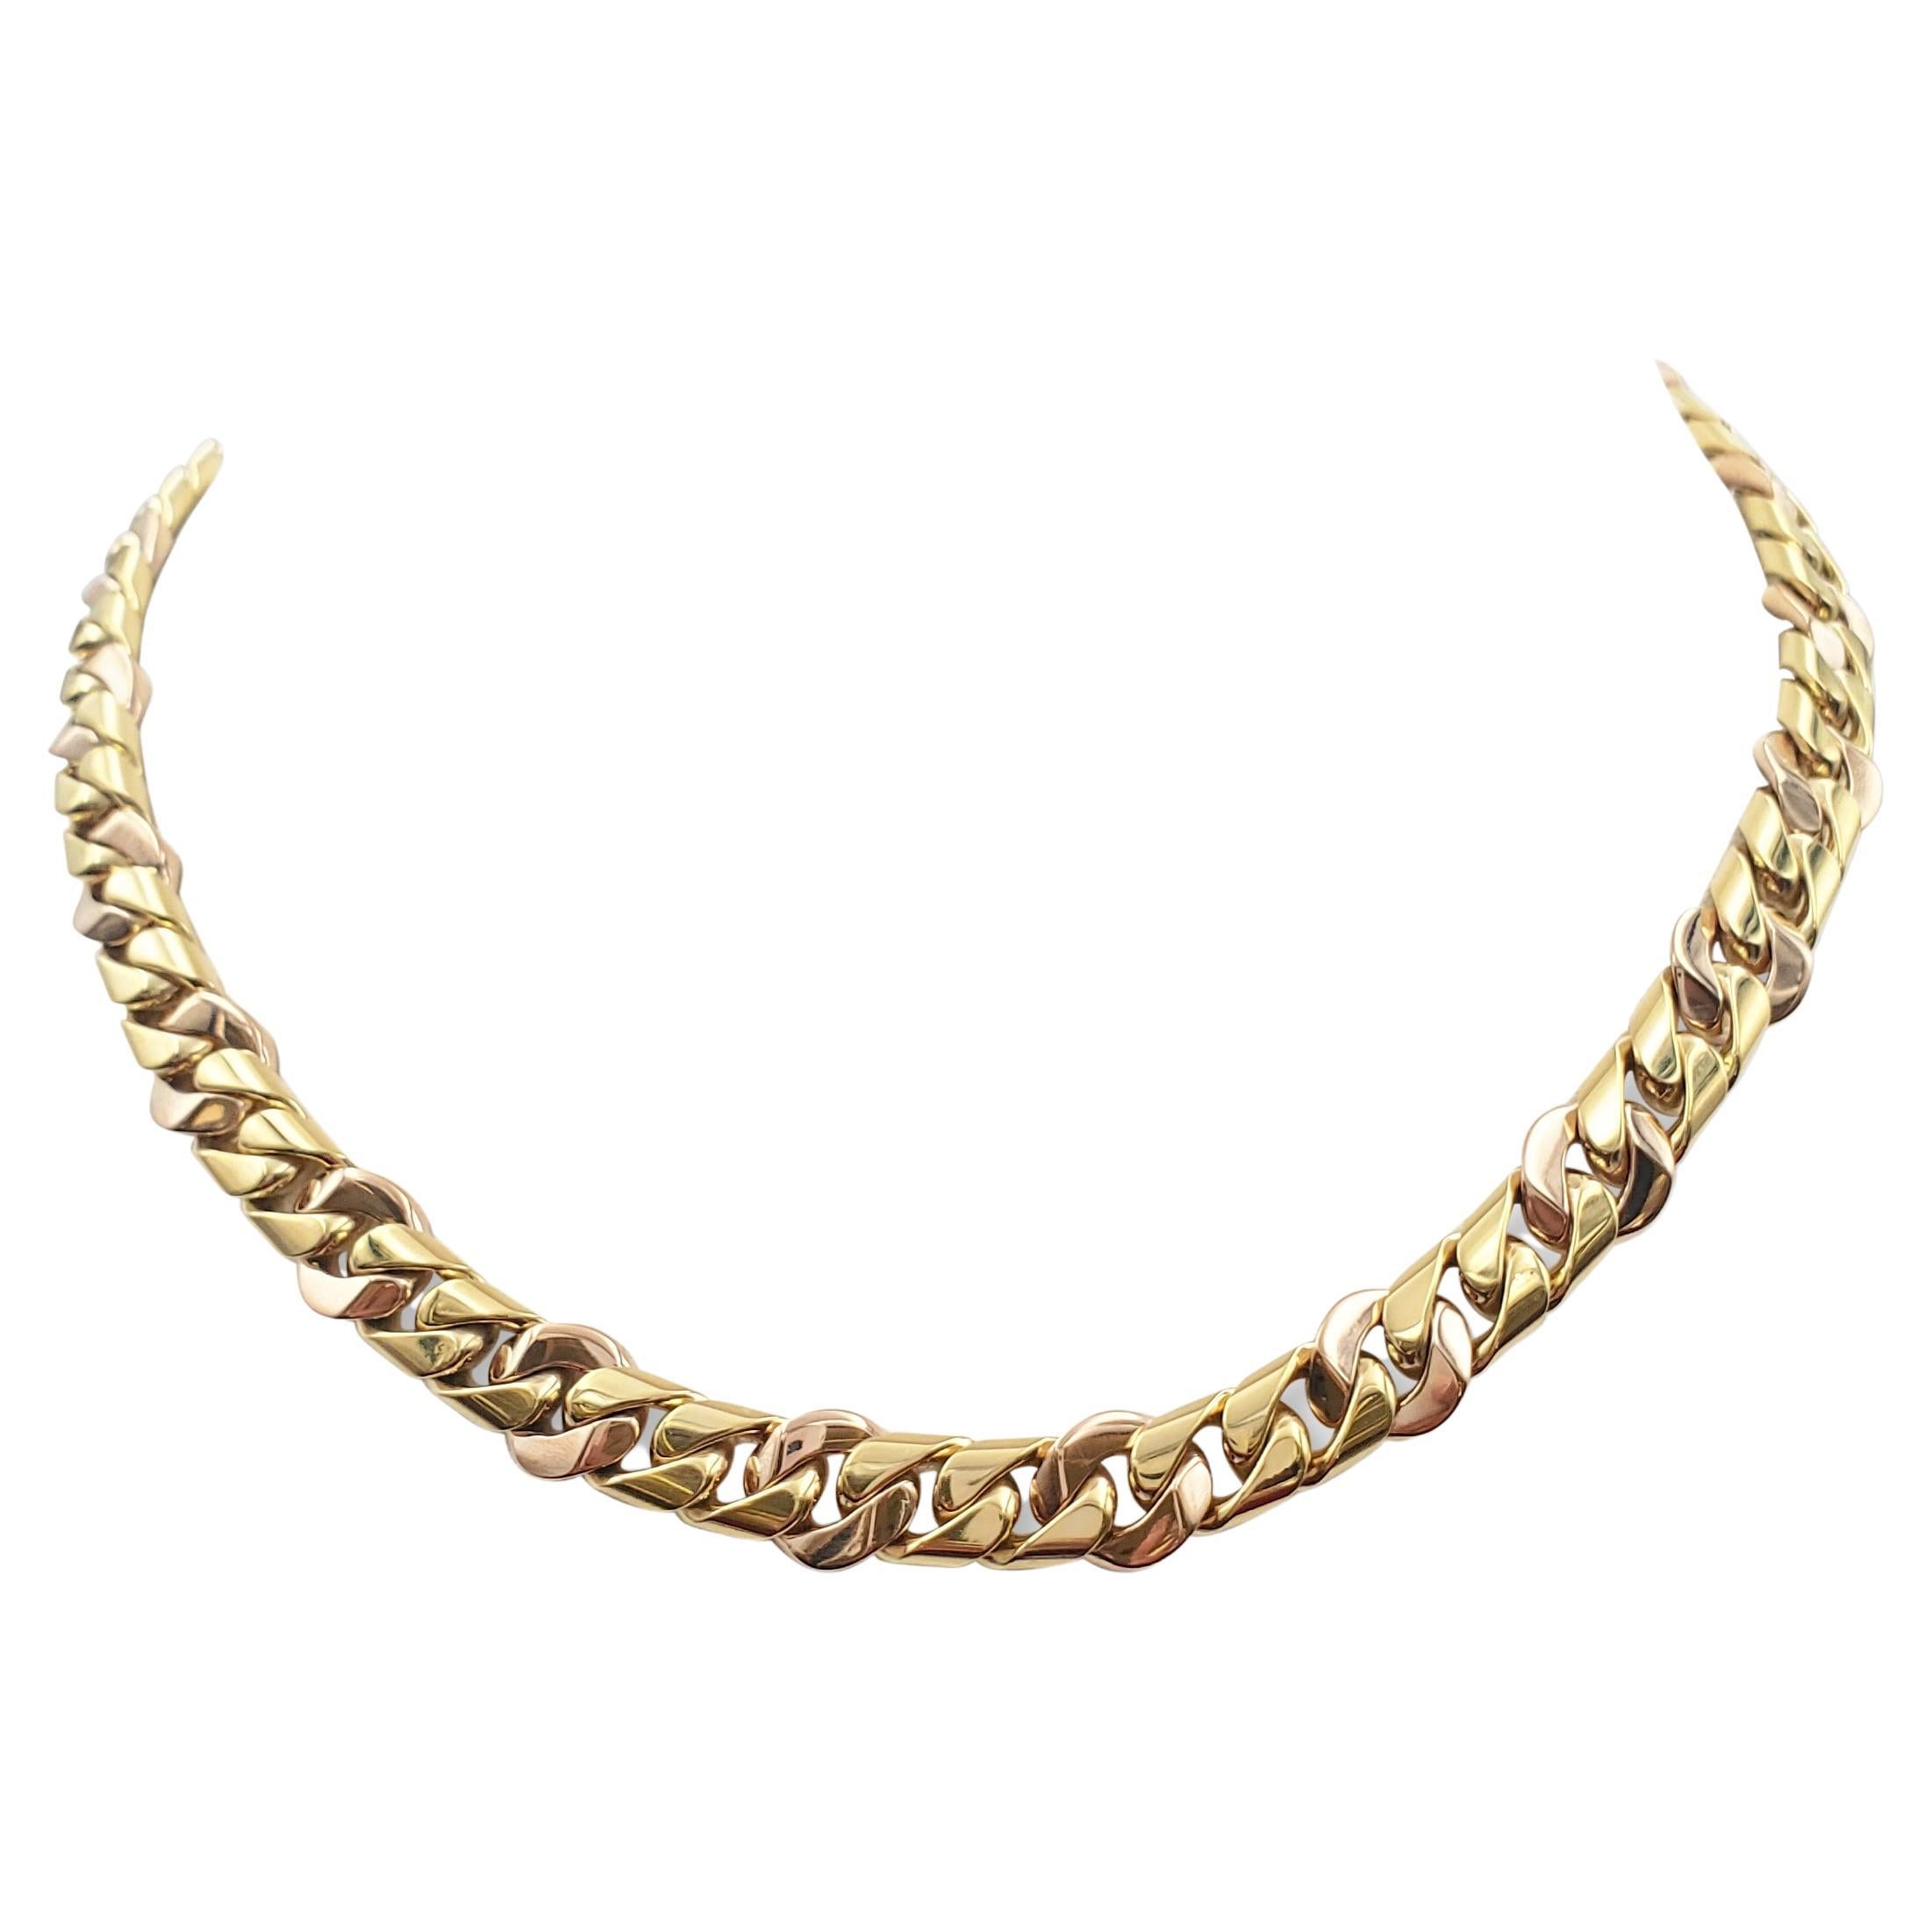 Bvlgari Two-Tone Gold Curb Link Necklace